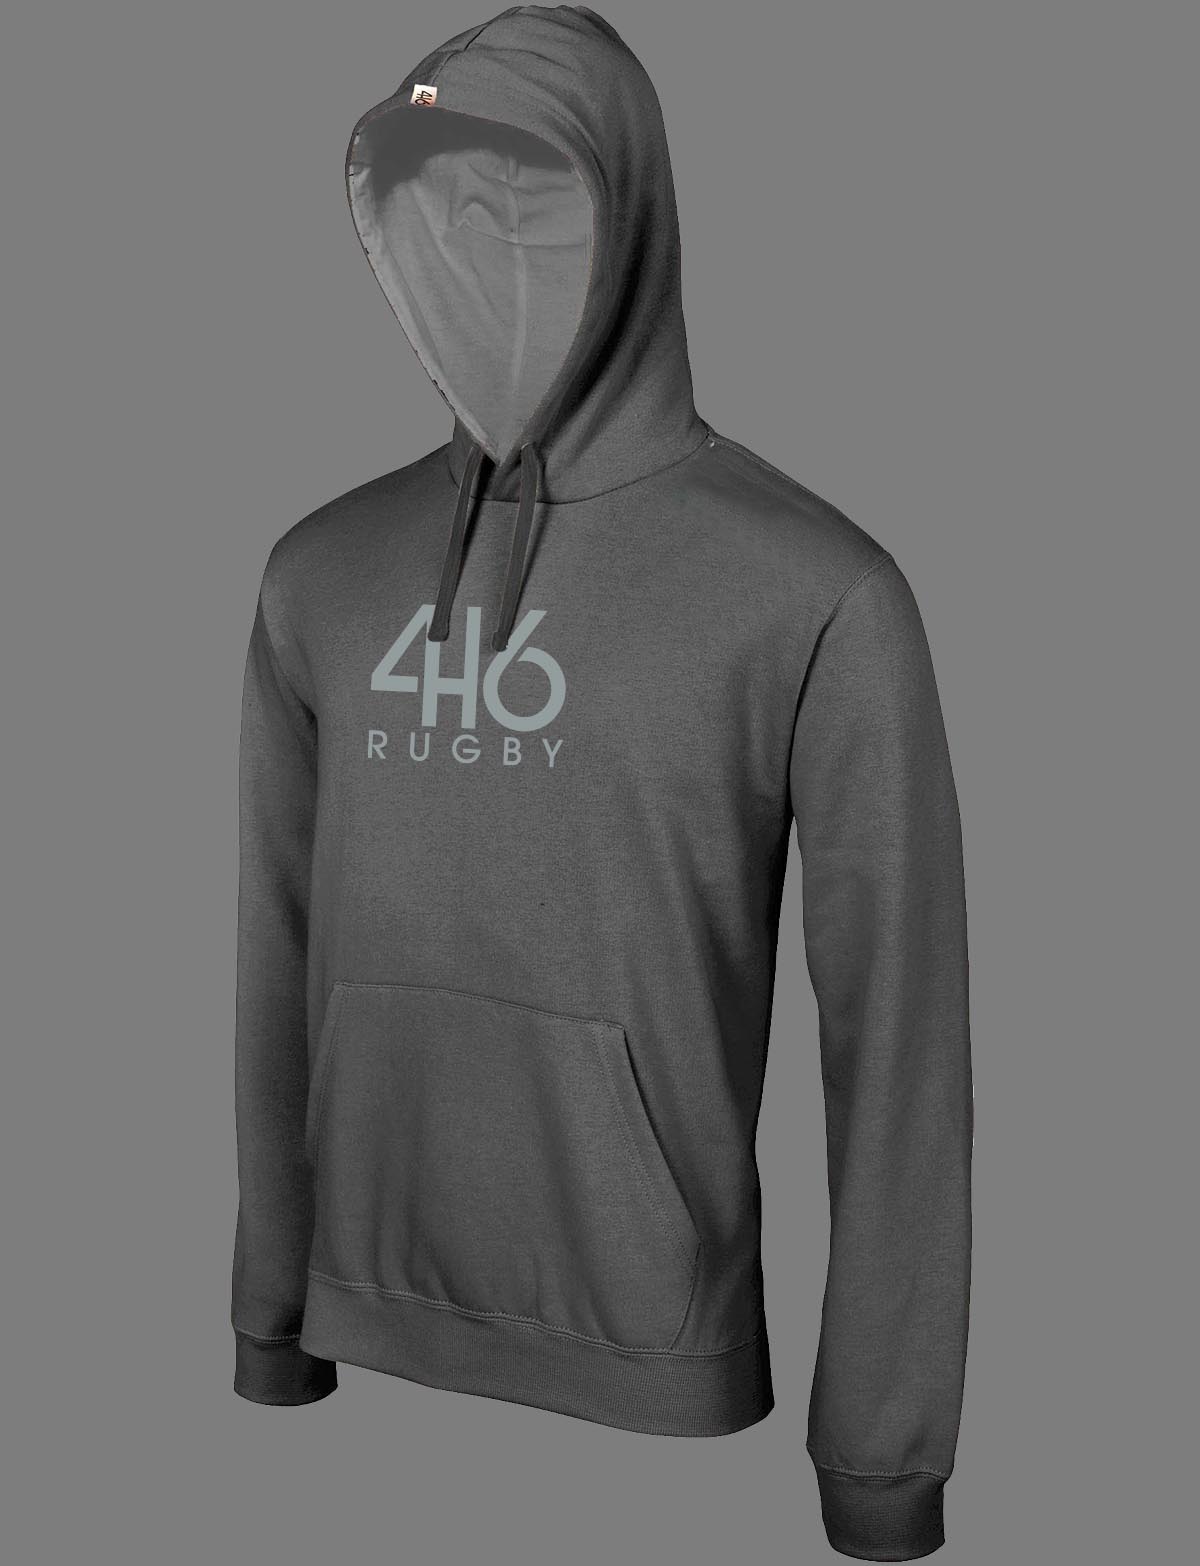 sweat 416 rugby gris logo gris